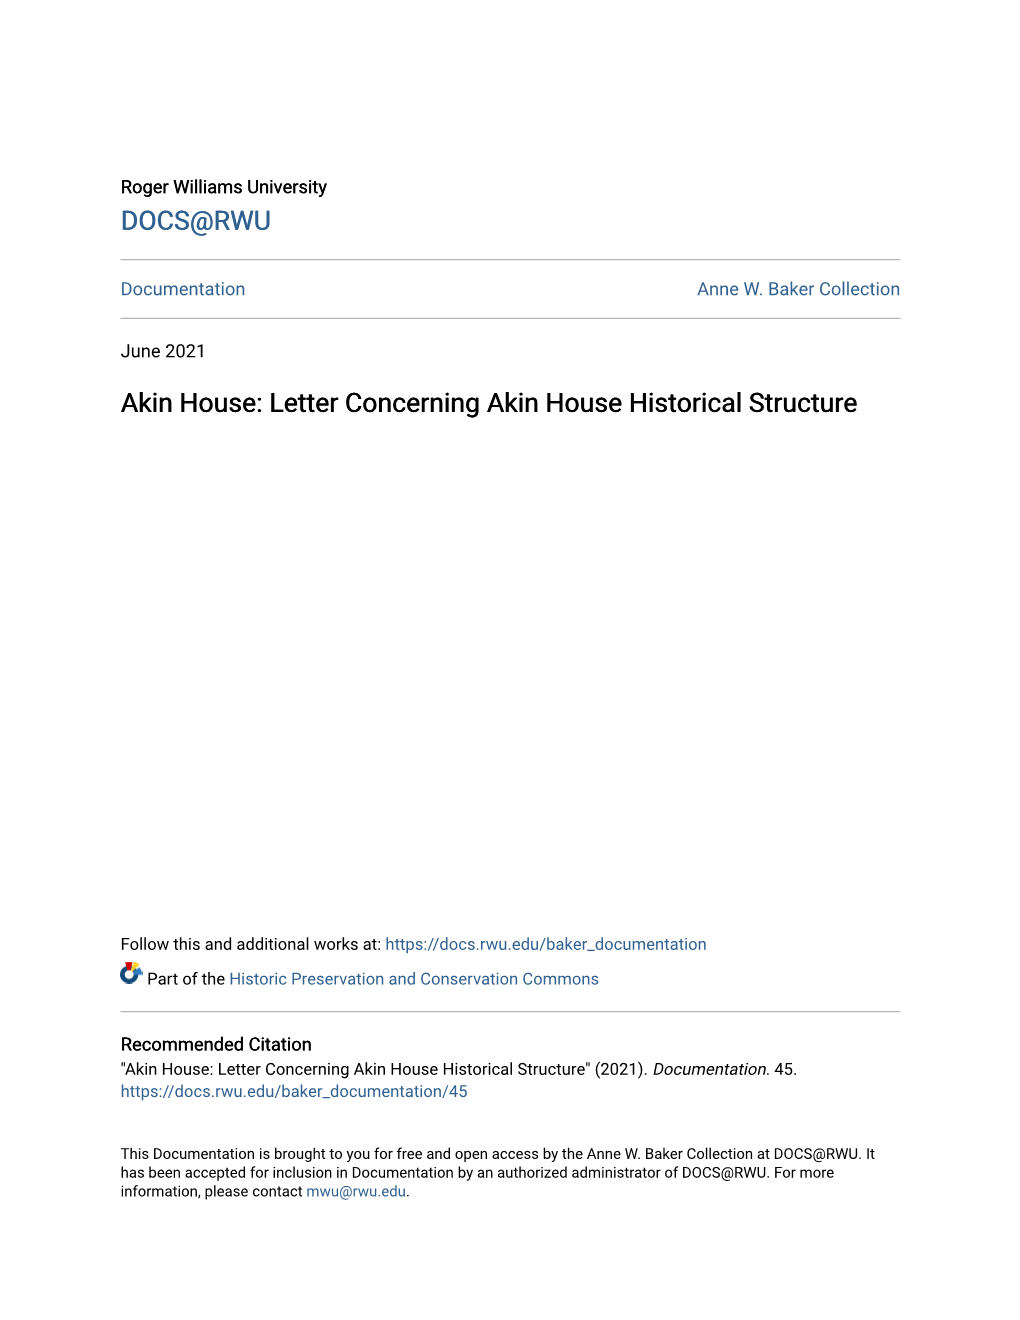 Letter Concerning Akin House Historical Structure